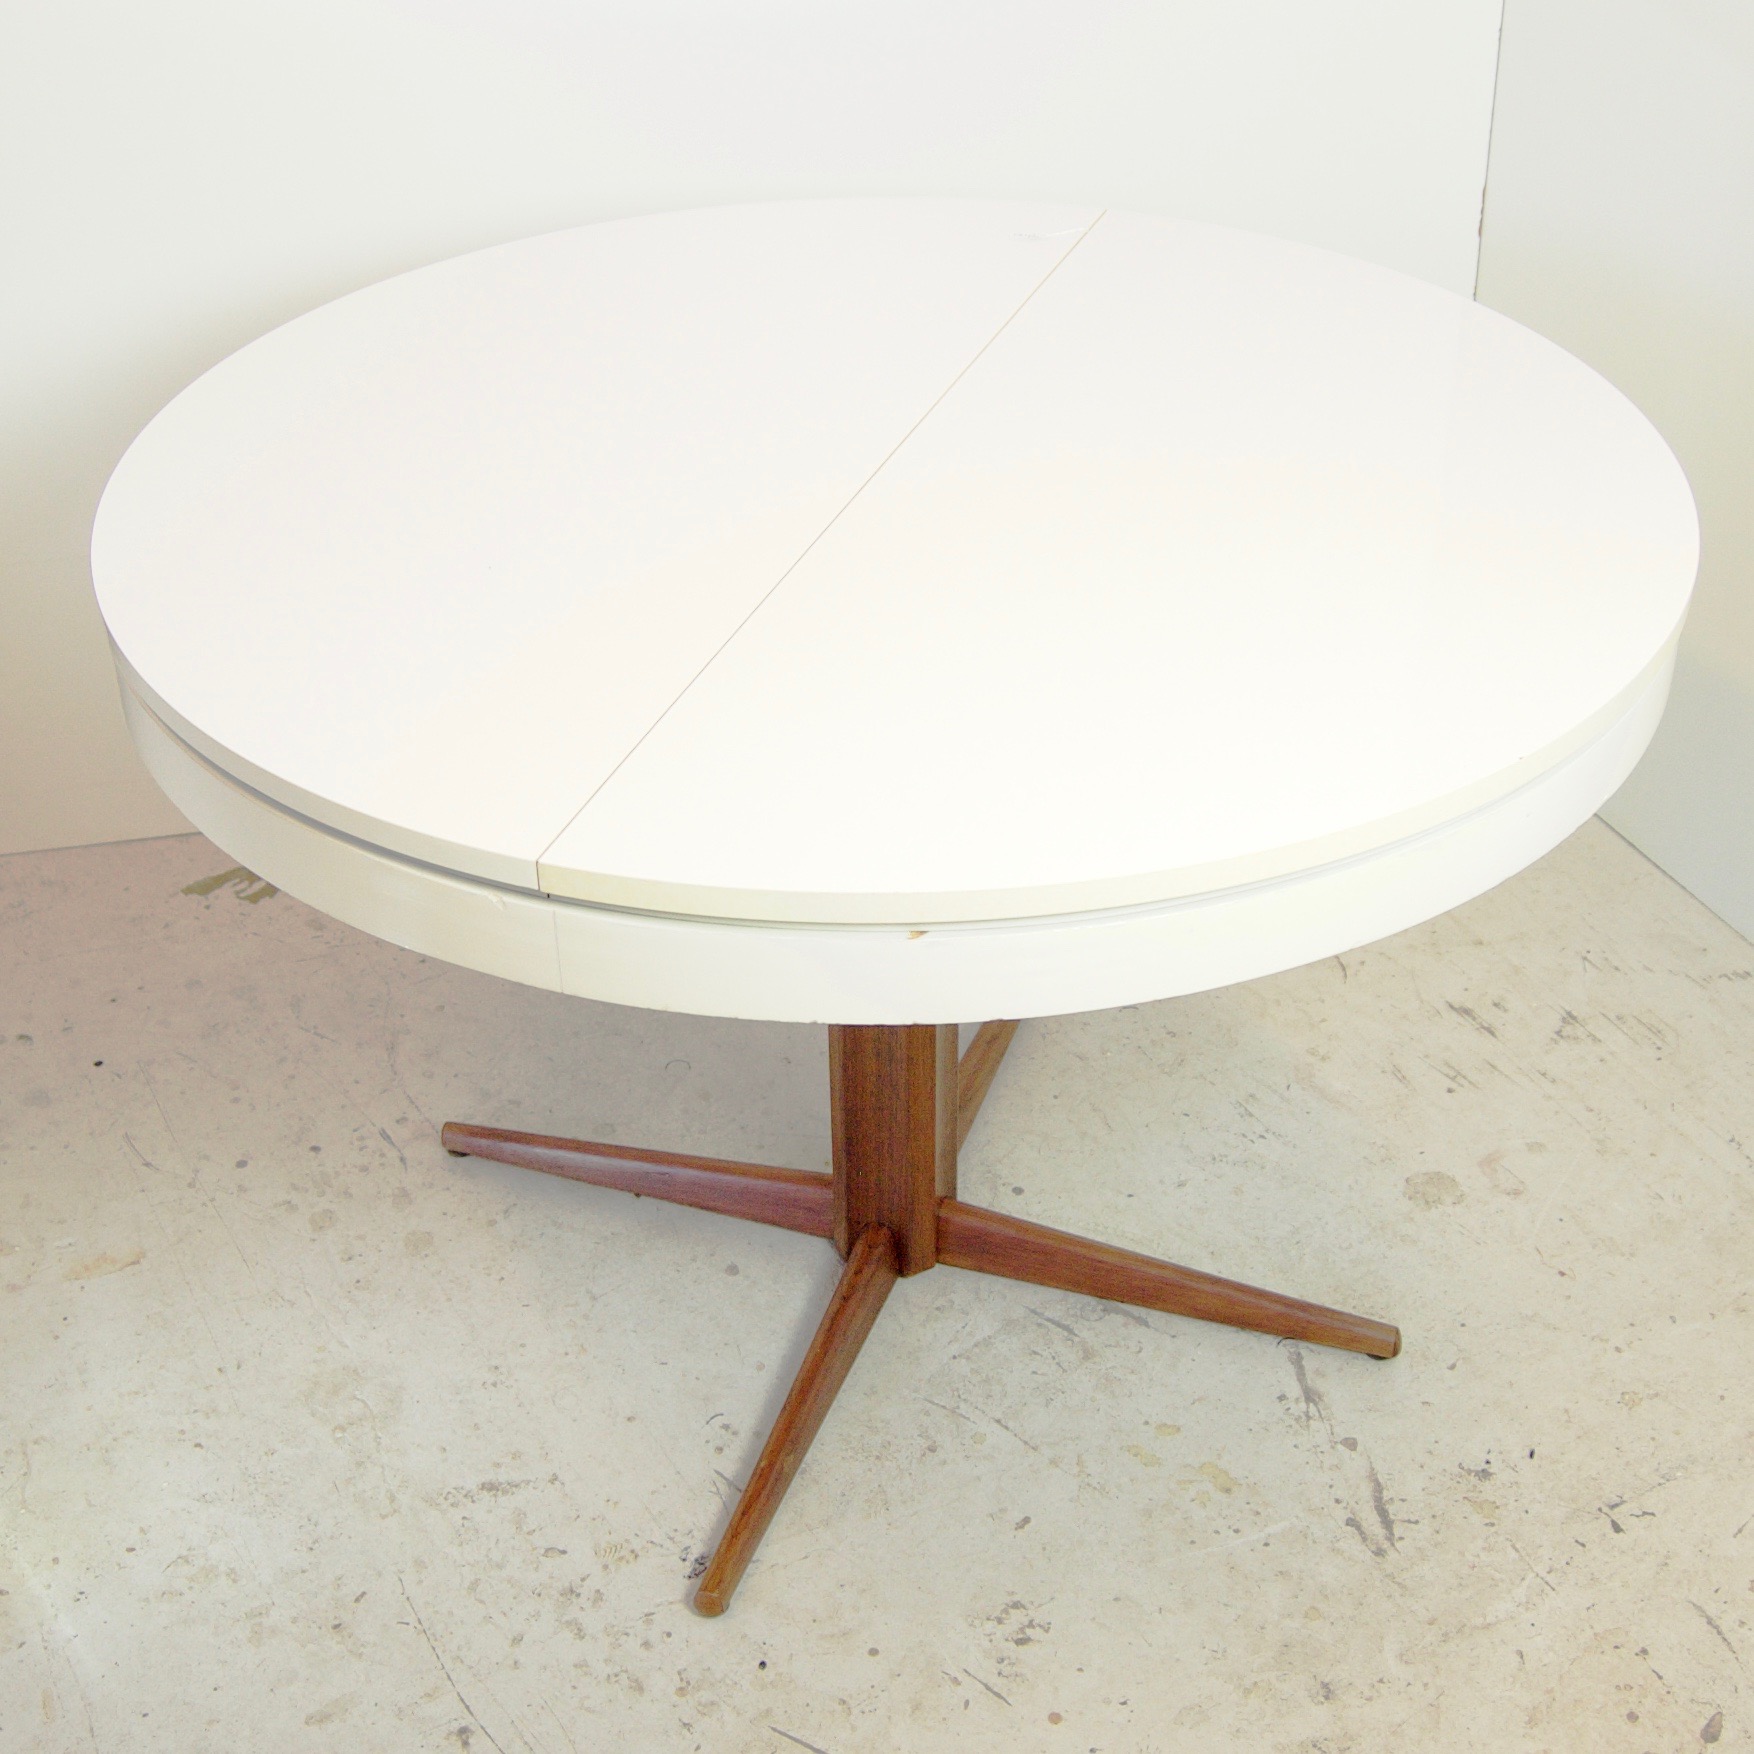 Closed cvintage round table